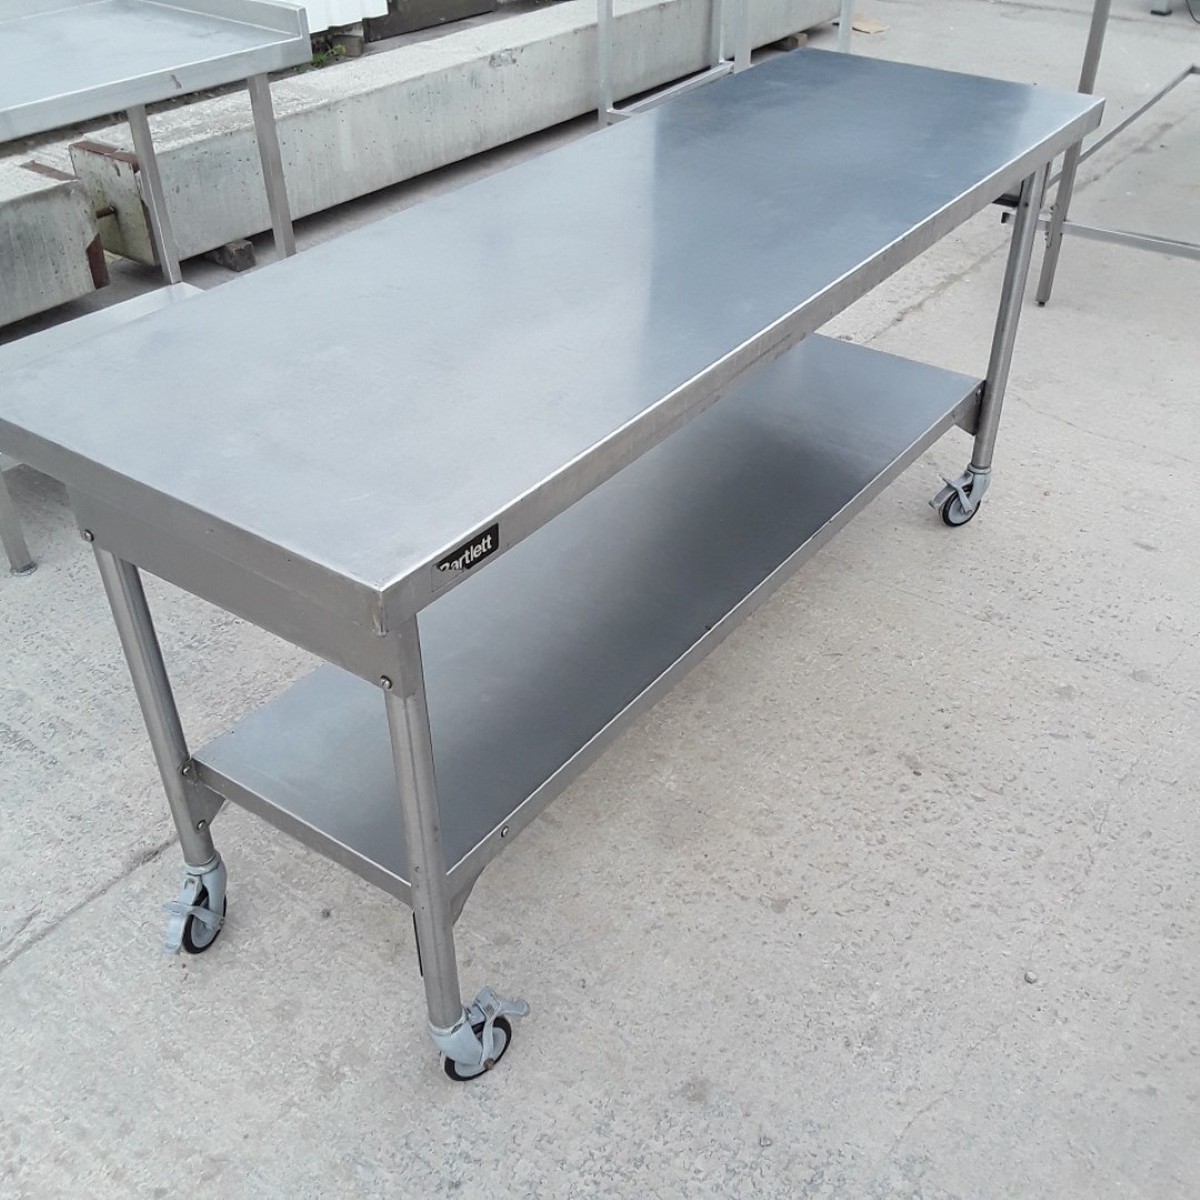 Used Bartlett Stainless Steel Table 1800mmw X 600mmd X 850mmh 581 